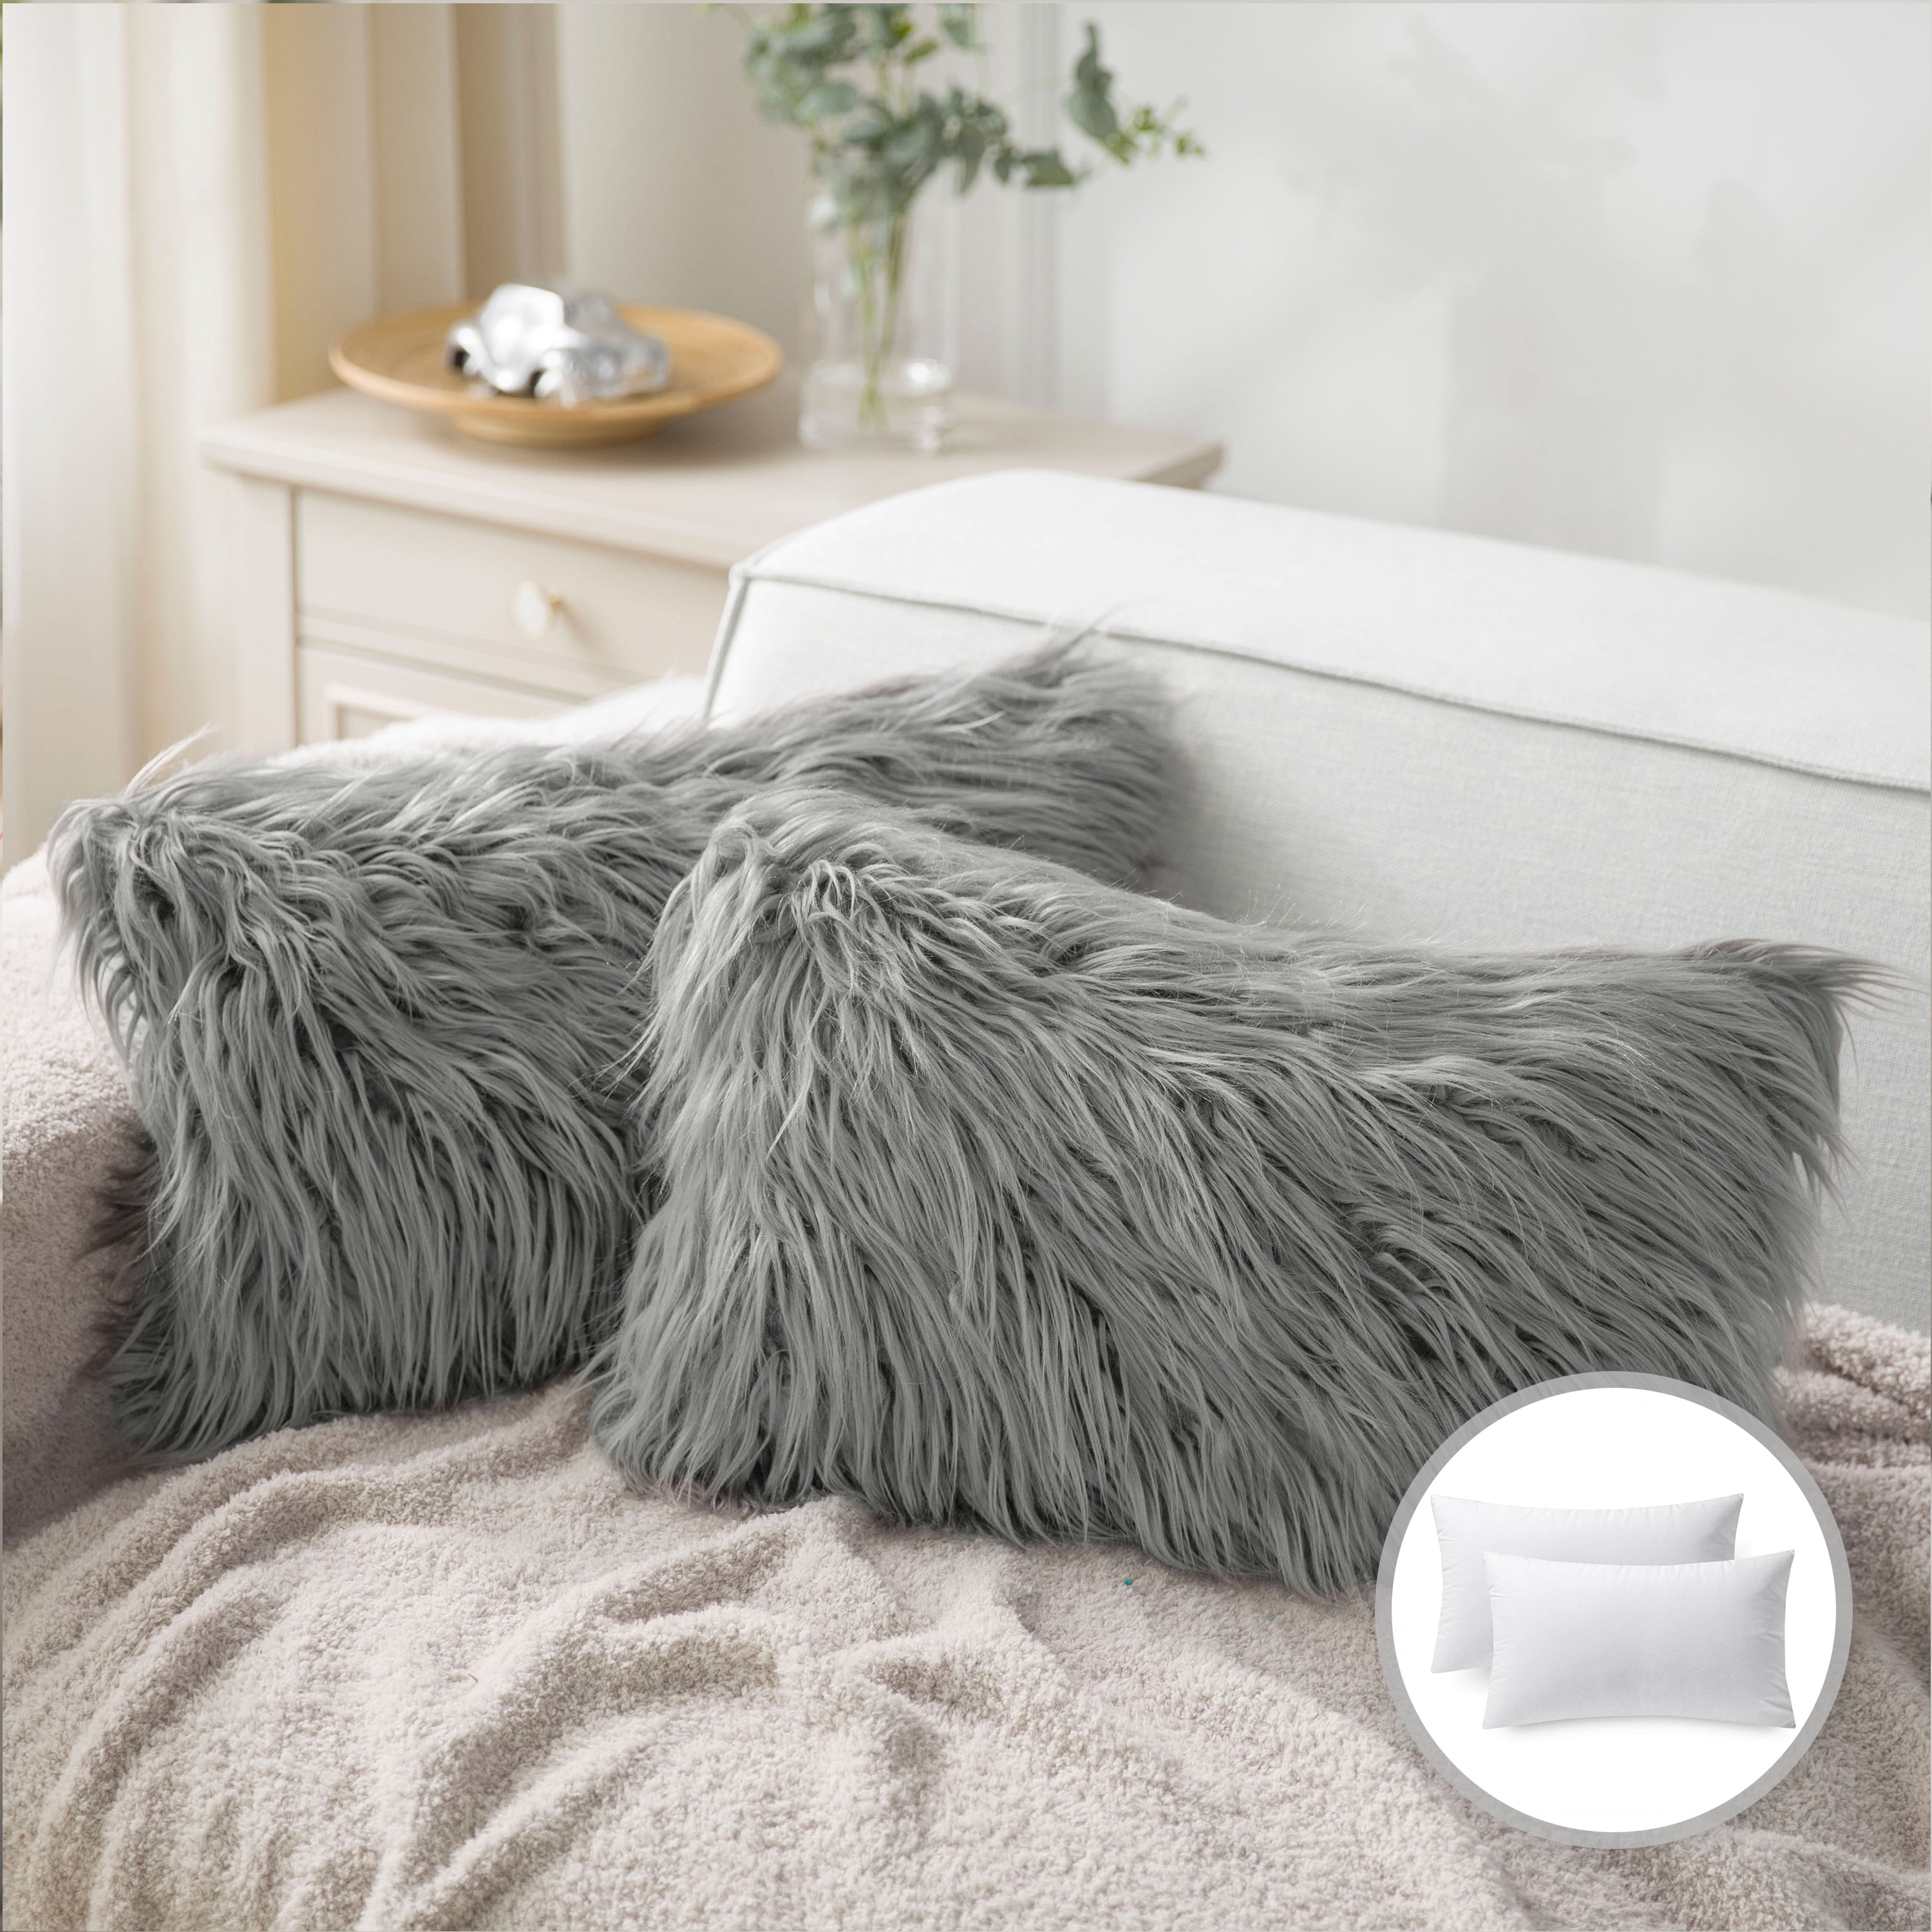 Phantoscope Luxury Mongolian Fluffy Faux Fur Series Square Decorative Throw Pillow Cusion for Couch, 12 inch x 20 inch, Gray, 2 Pack